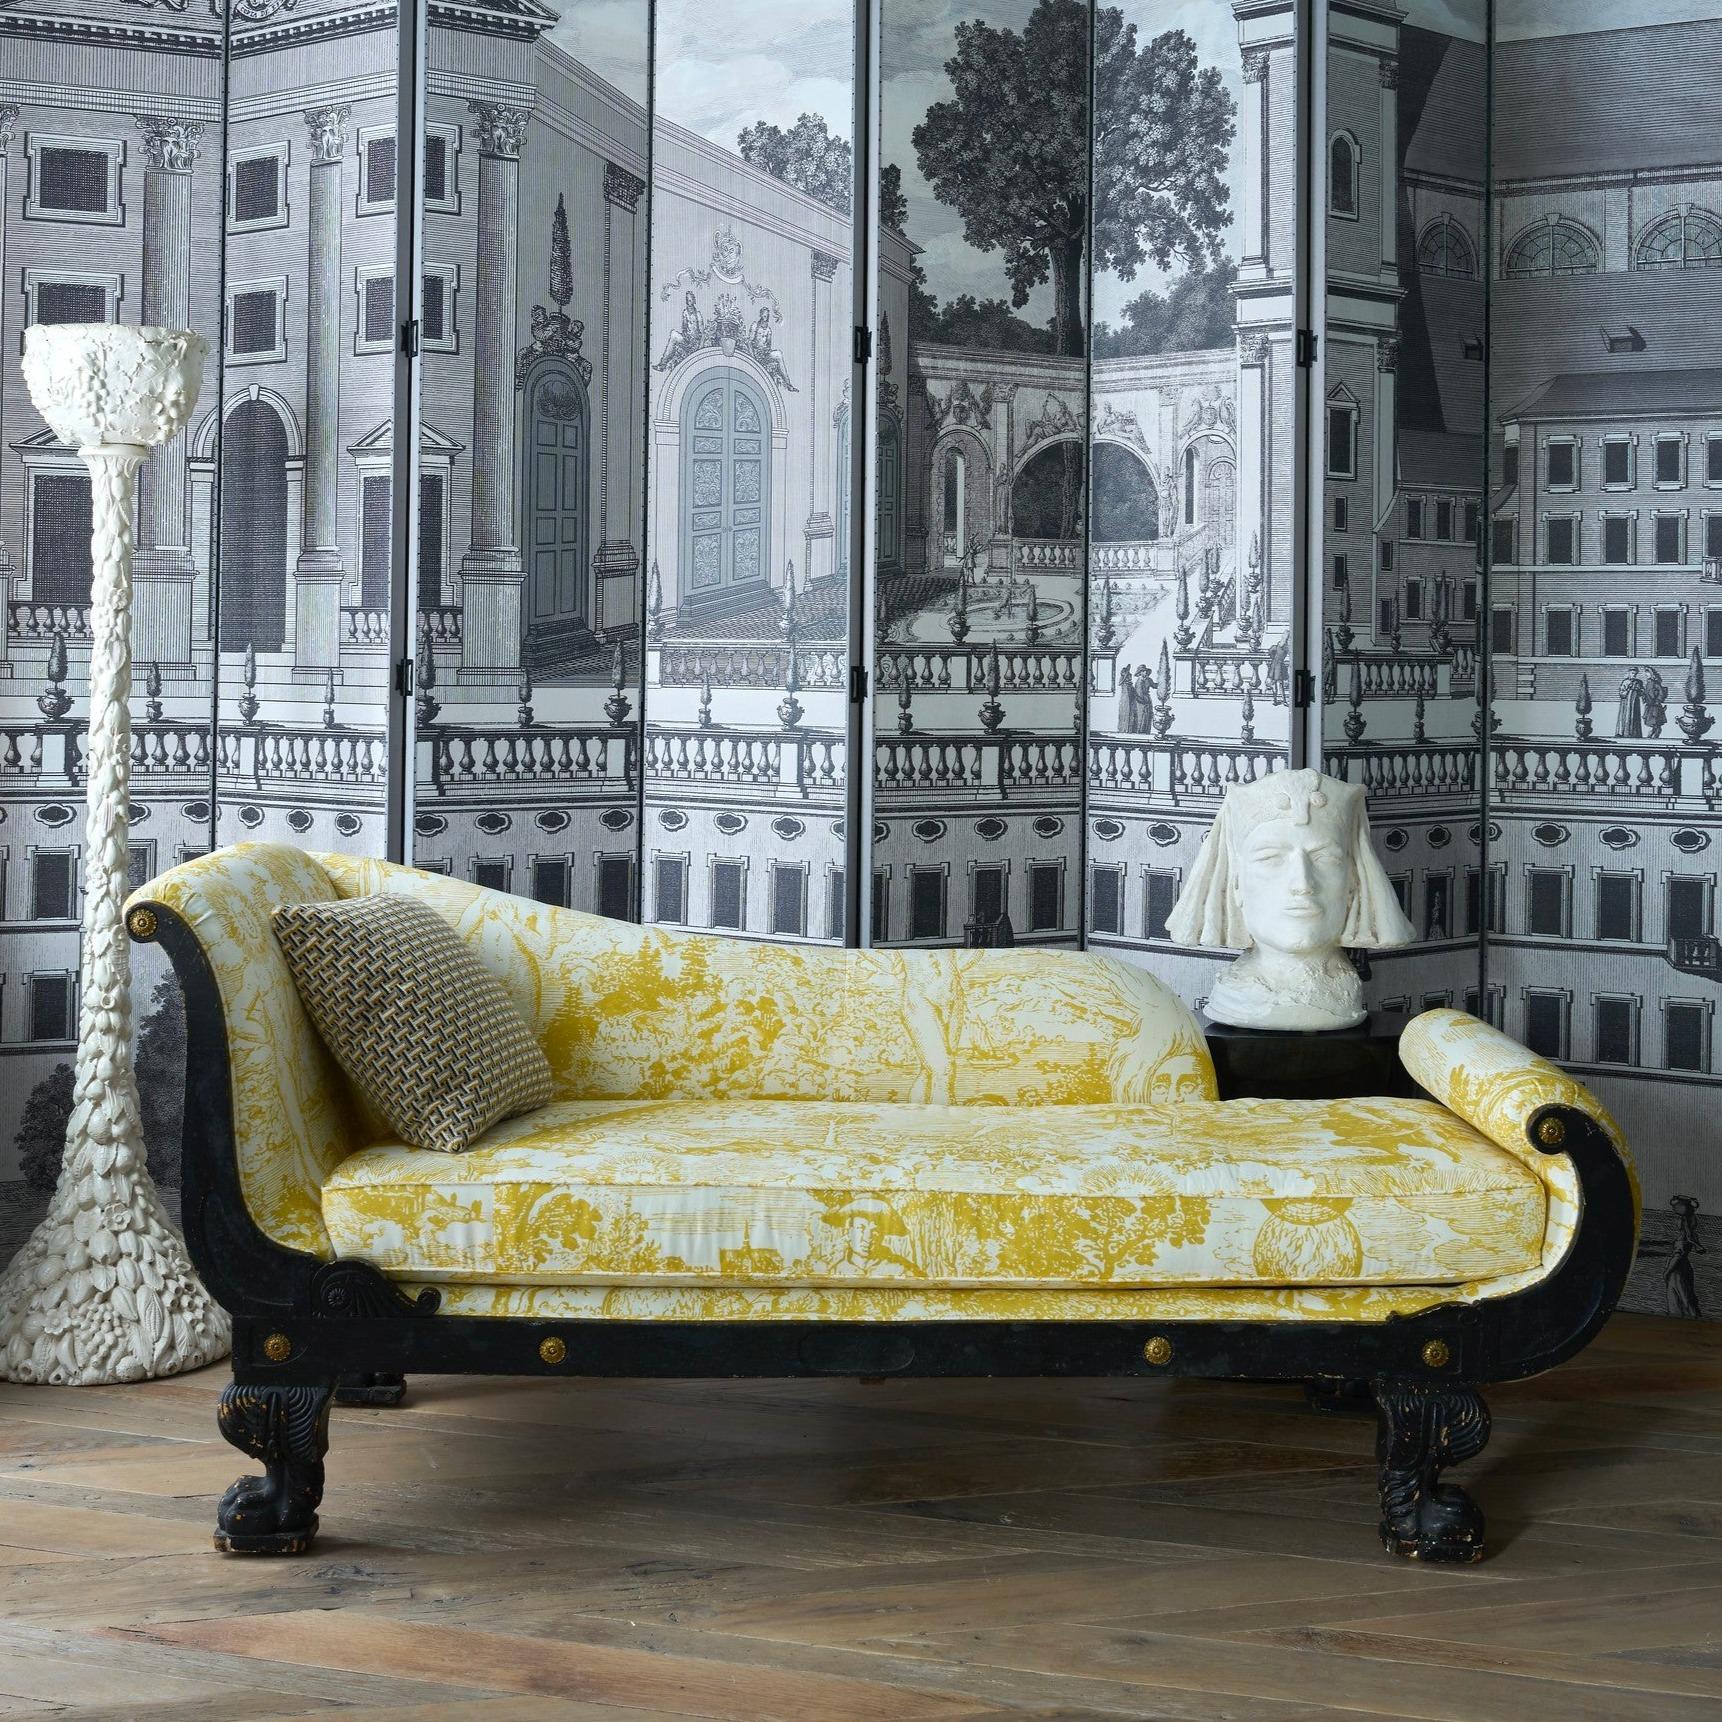 A period 19th Century American Empire chaise newly upholstered in Schumacher Johnson Hartig Libertine Yellow Modern Toile Chaise. This heavy yellow and white cotton fabric is a layered, mystically-inflected toile based on Renaissance drawings and